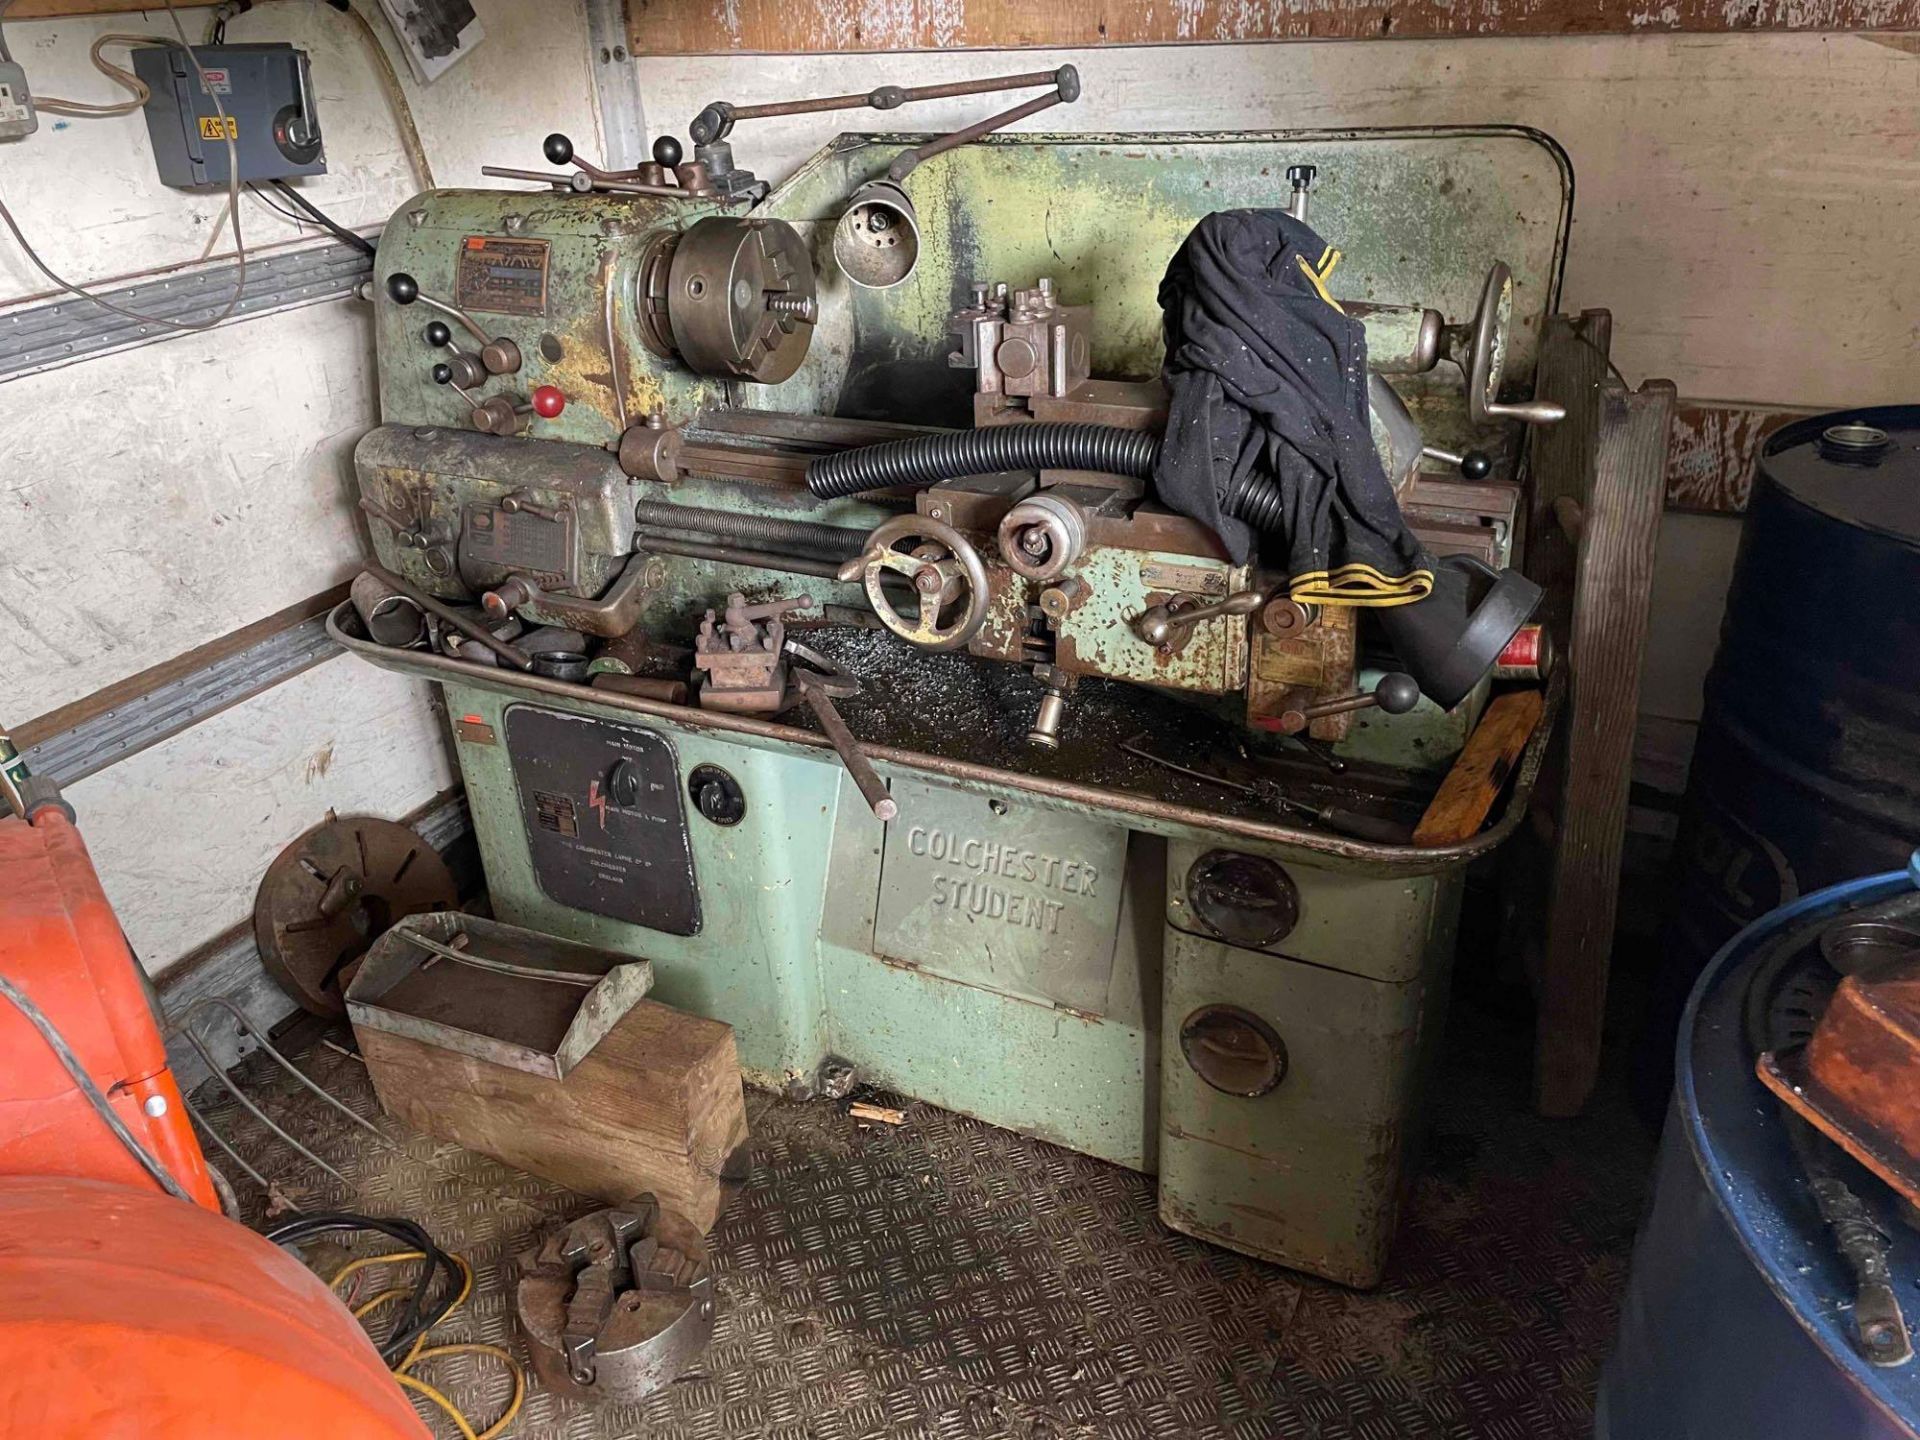 Colchester Student 6 workshop lathe, 3ph. Sold in situ, buyer to remove